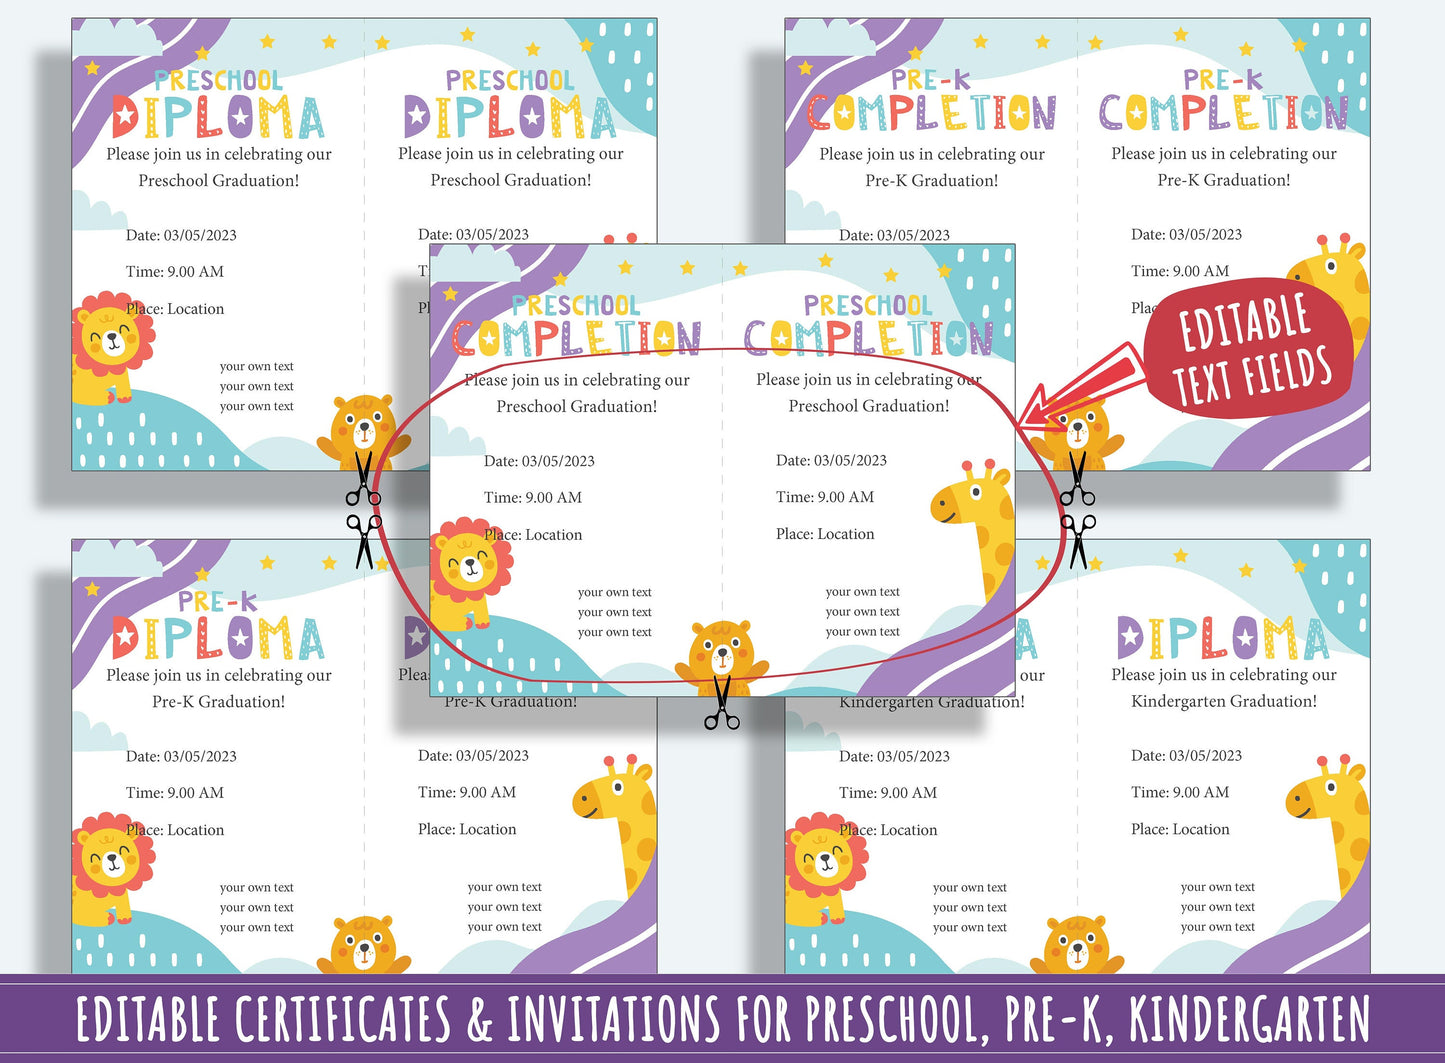 37 Pages of Editable Diploma, Certificate, and Invitation Templates for Preschool and Kindergarten, Featuring Animal Theme, Instant Download